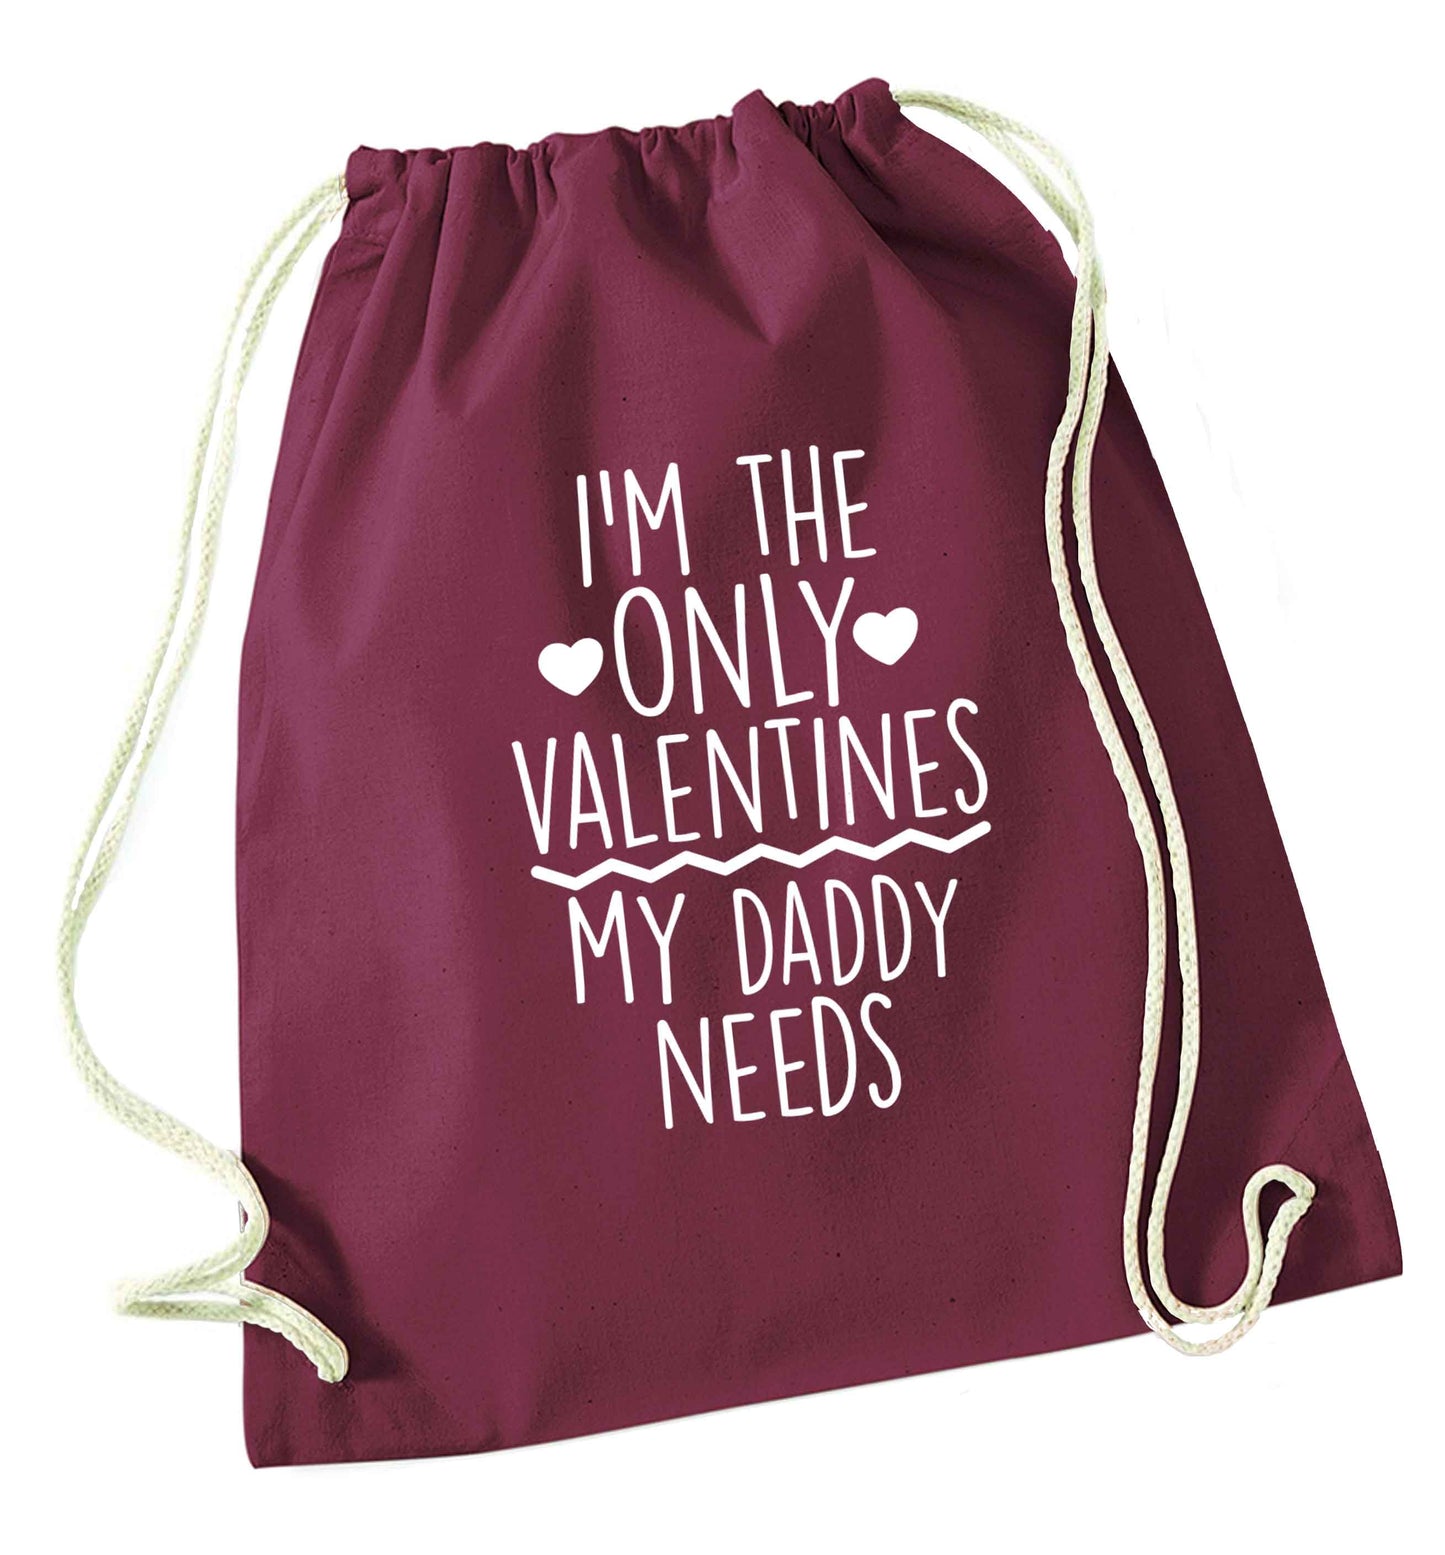 I'm the only valentines my daddy needs maroon drawstring bag